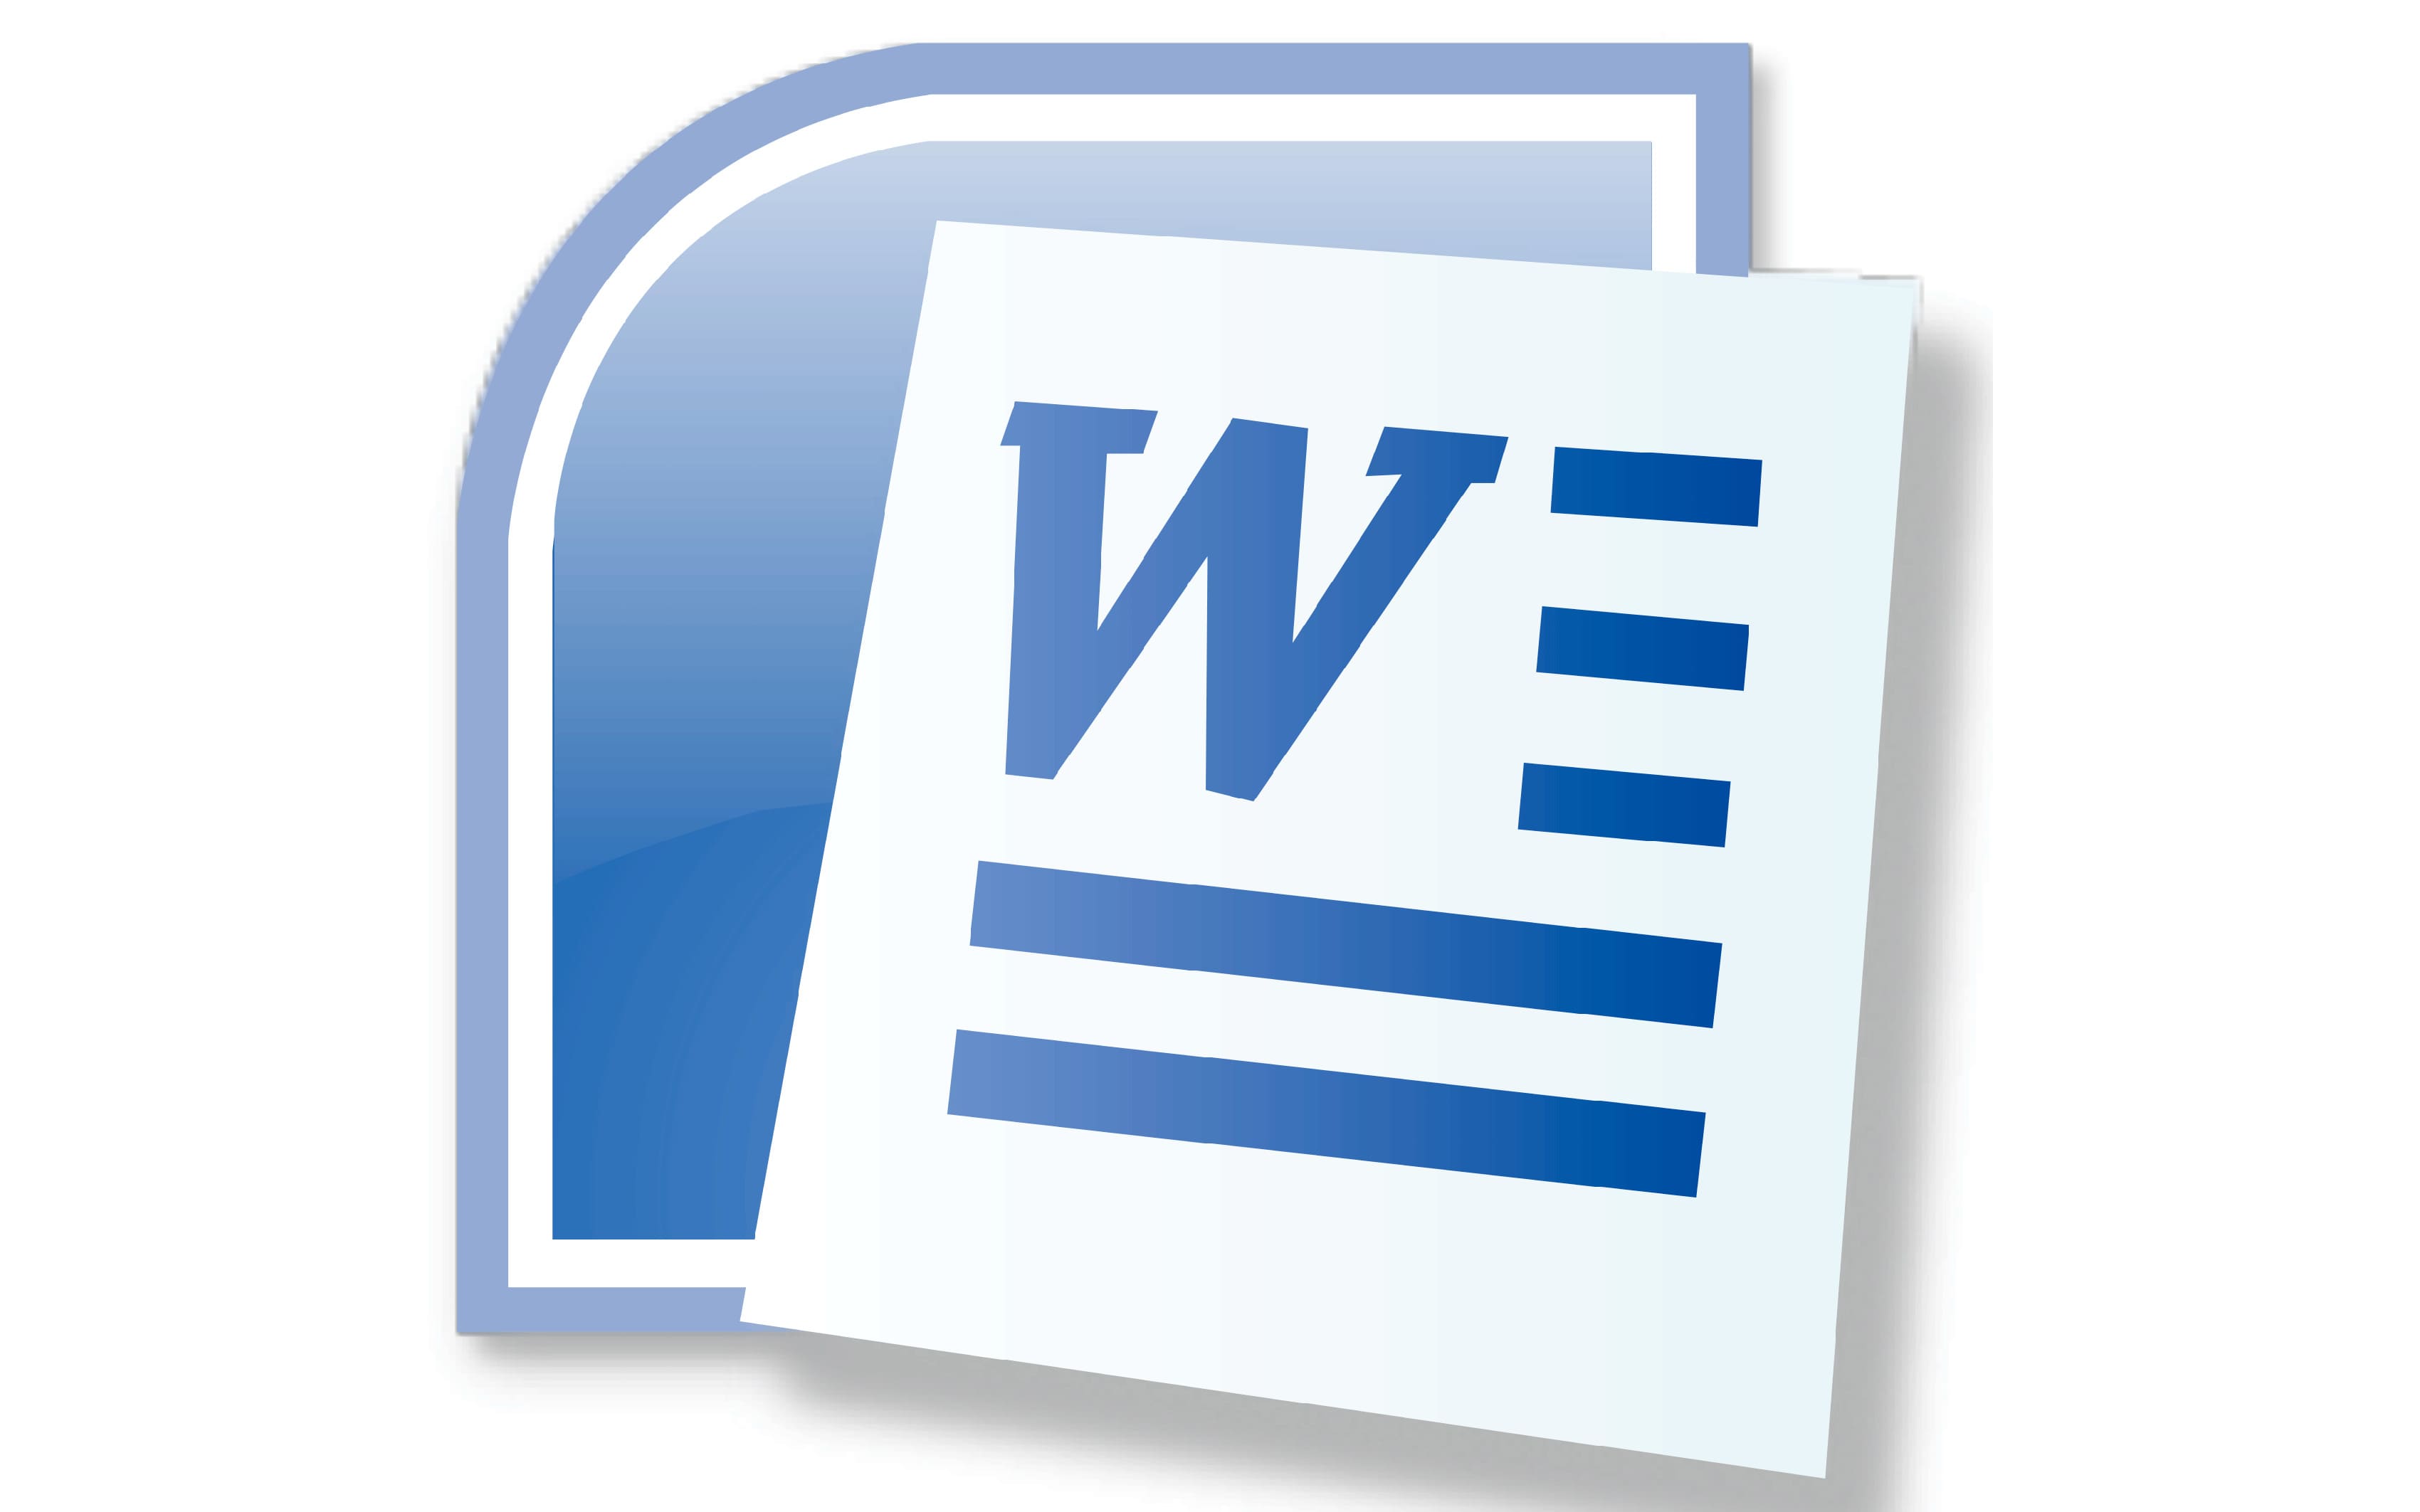 ms office word 2013 free download